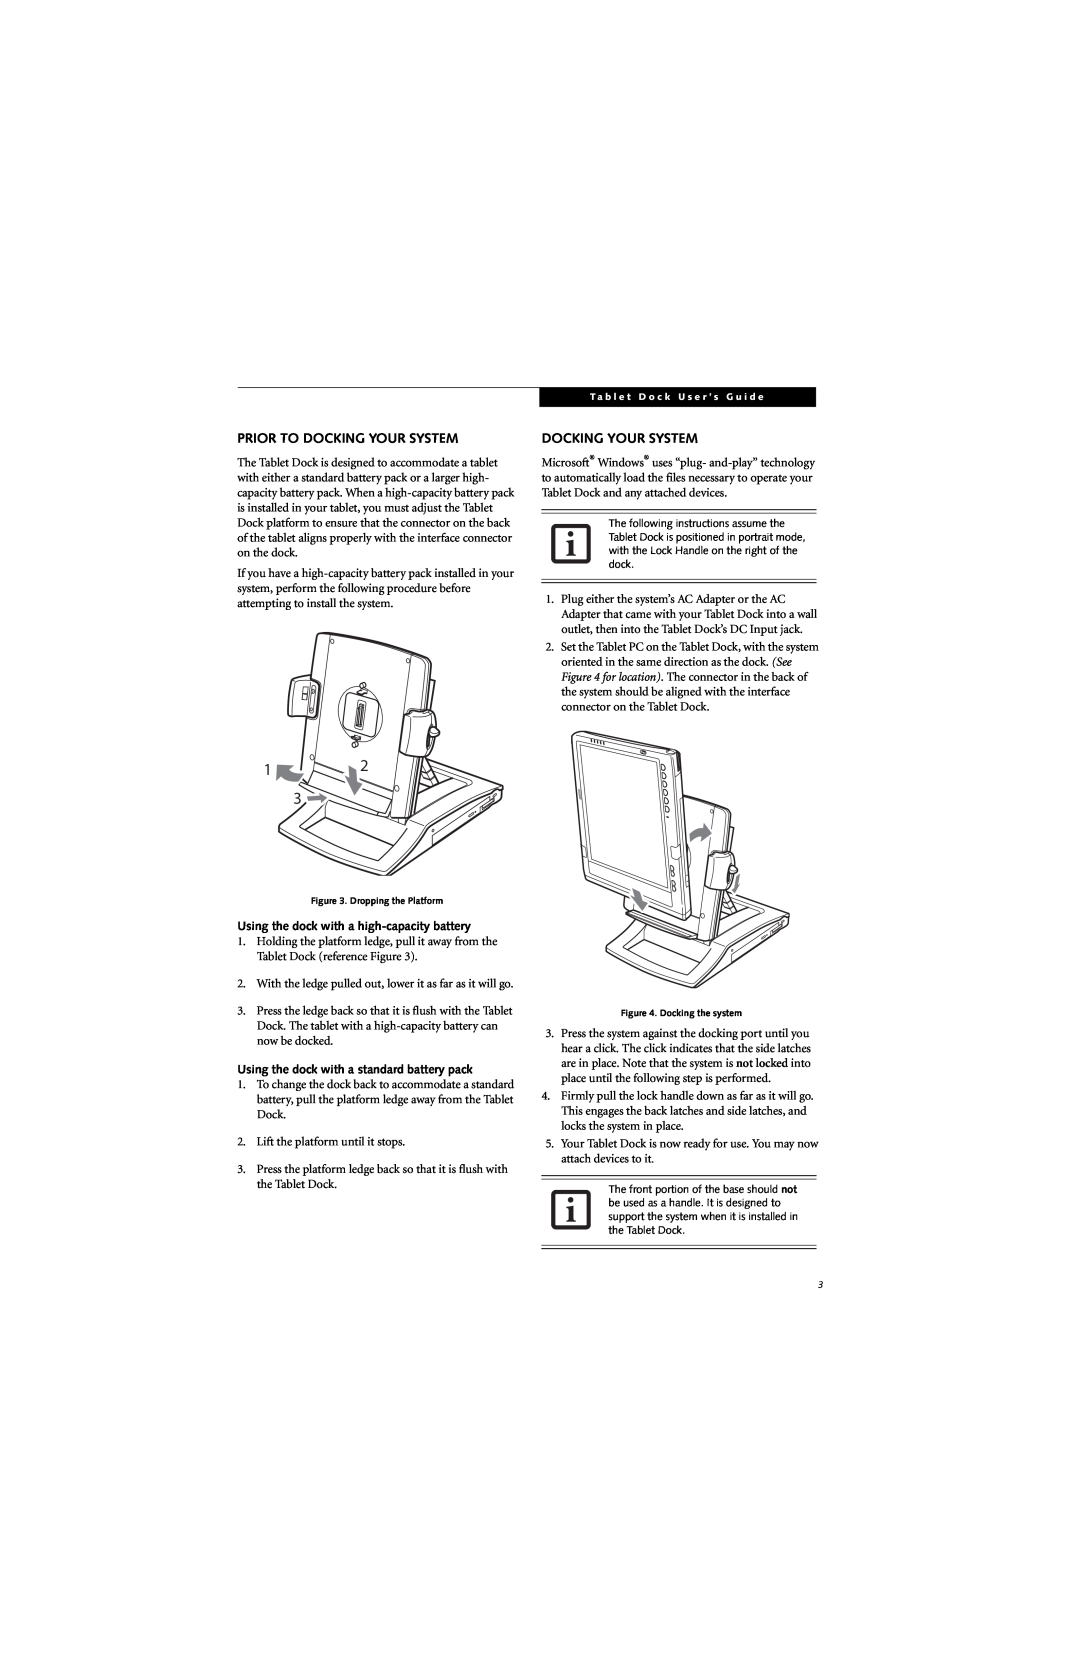 Fujitsu Siemens Computers Stylistic 5011D manual Prior To Docking Your System, Using the dock with a high-capacity battery 